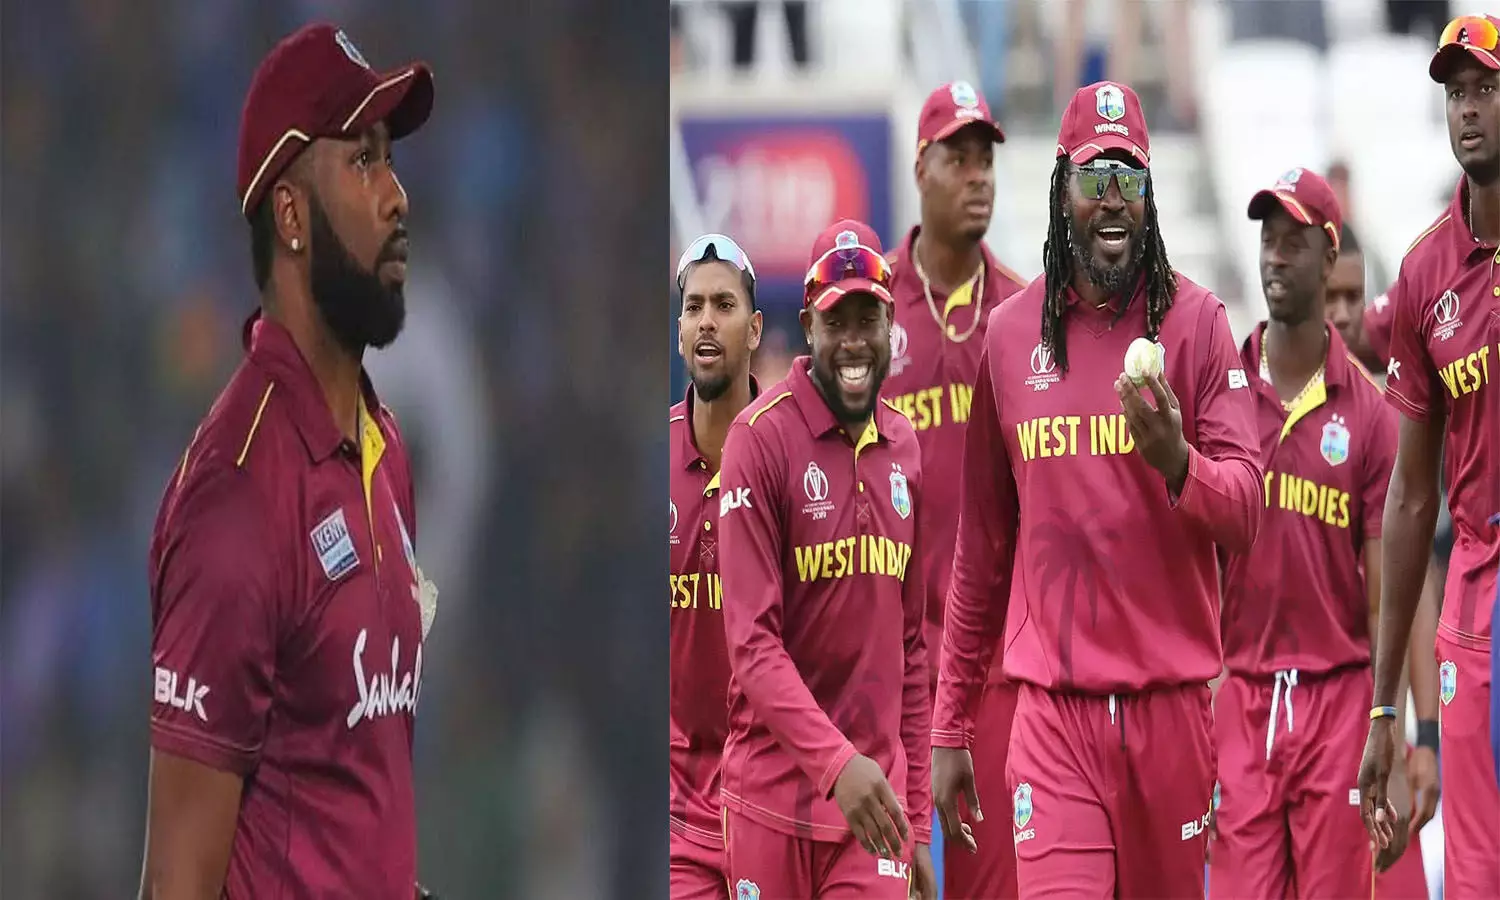 T20 World Cup 2021 West Indies